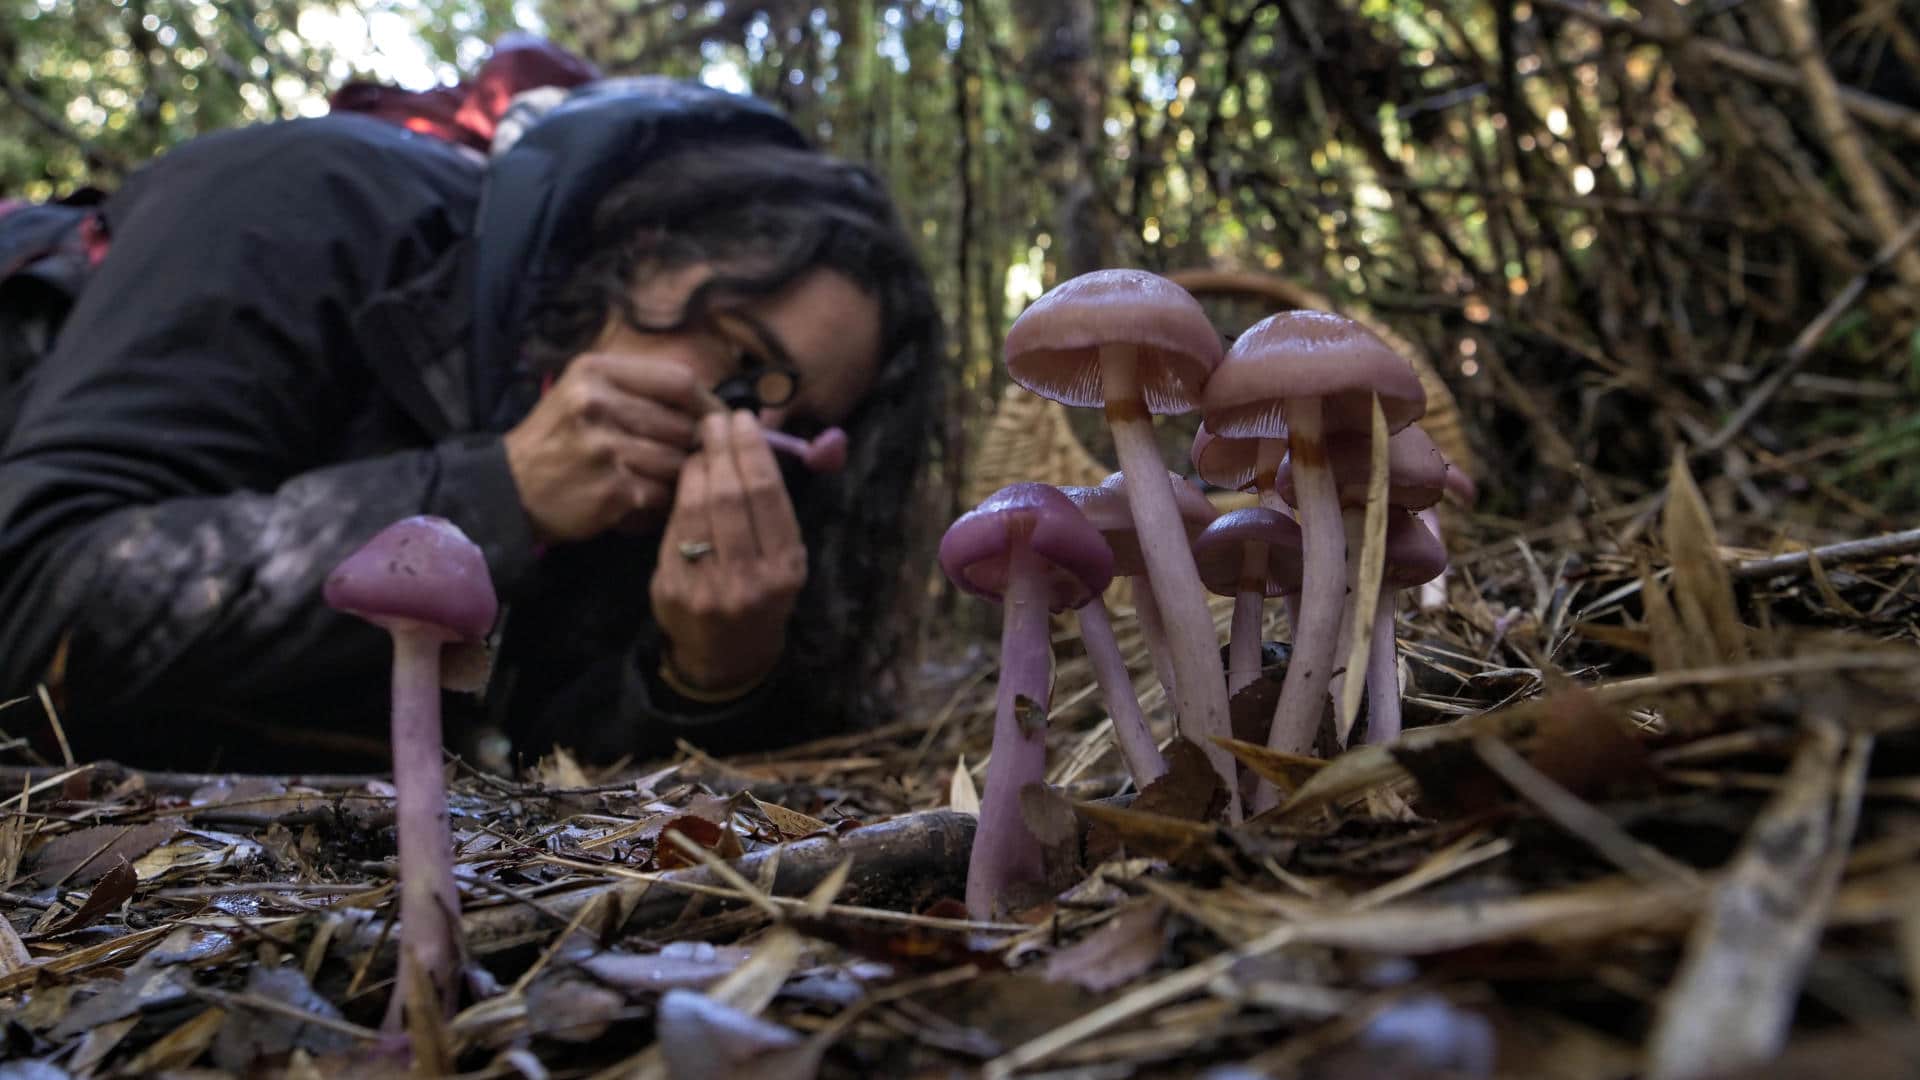 Purple colored mushrooms spring from a forest floor littered with leaves and sticks. In the background, a woman examines a mushroom.